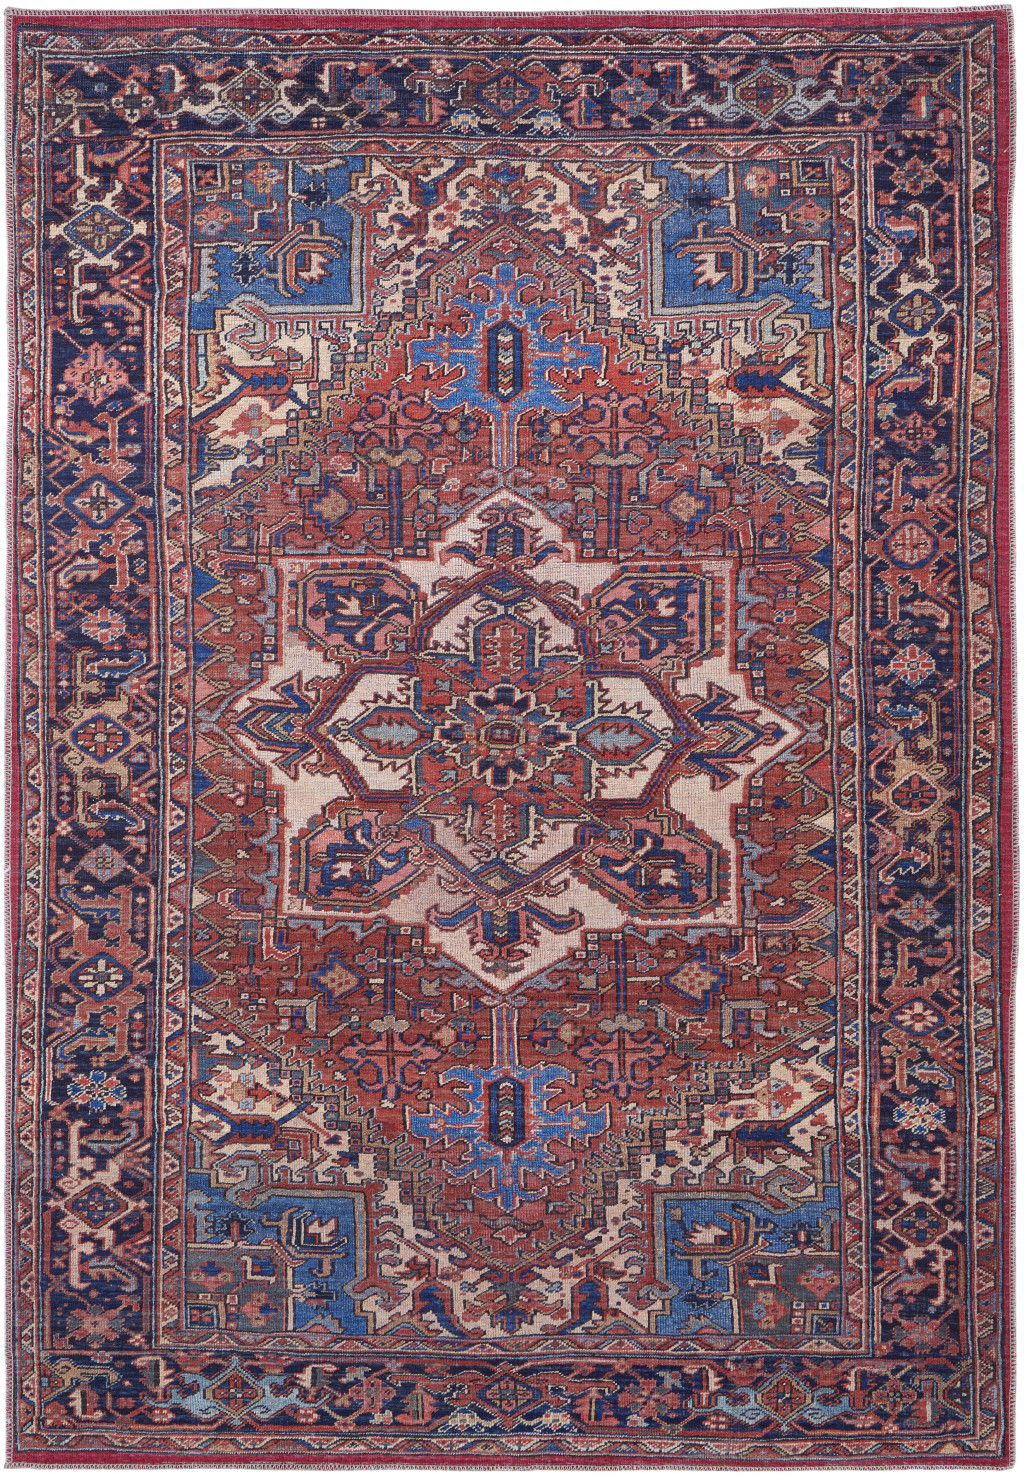 9' X 12' Red Tan And Blue Floral Power Loom Area Rug-515115-1